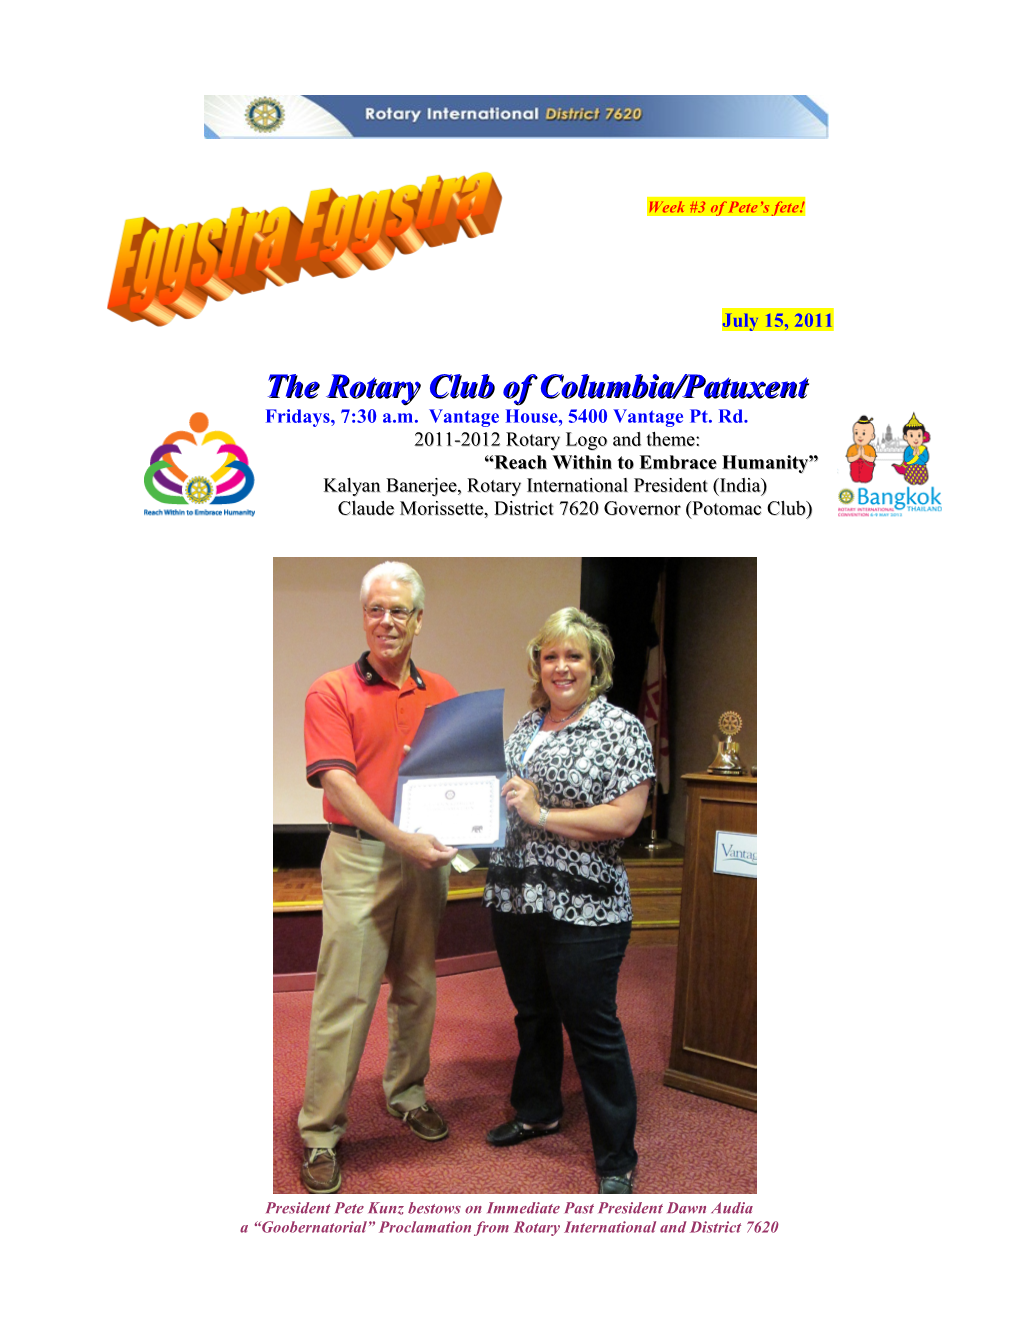 The Rotary Club of Columbia/Patuxent